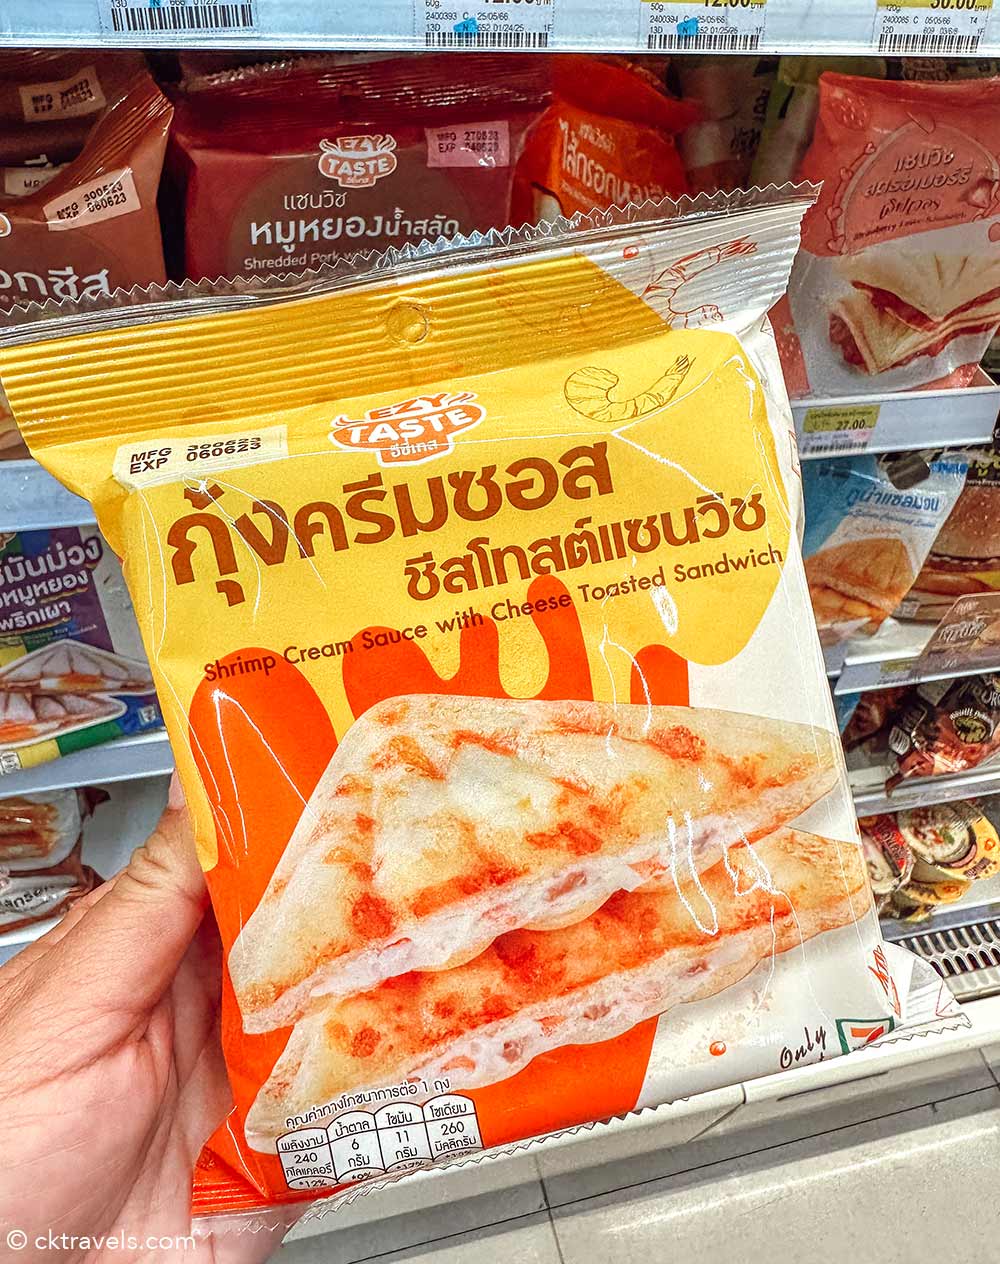  Shrimp Cream Sauce with Cheese Toasted Sandwich at 7-eleven